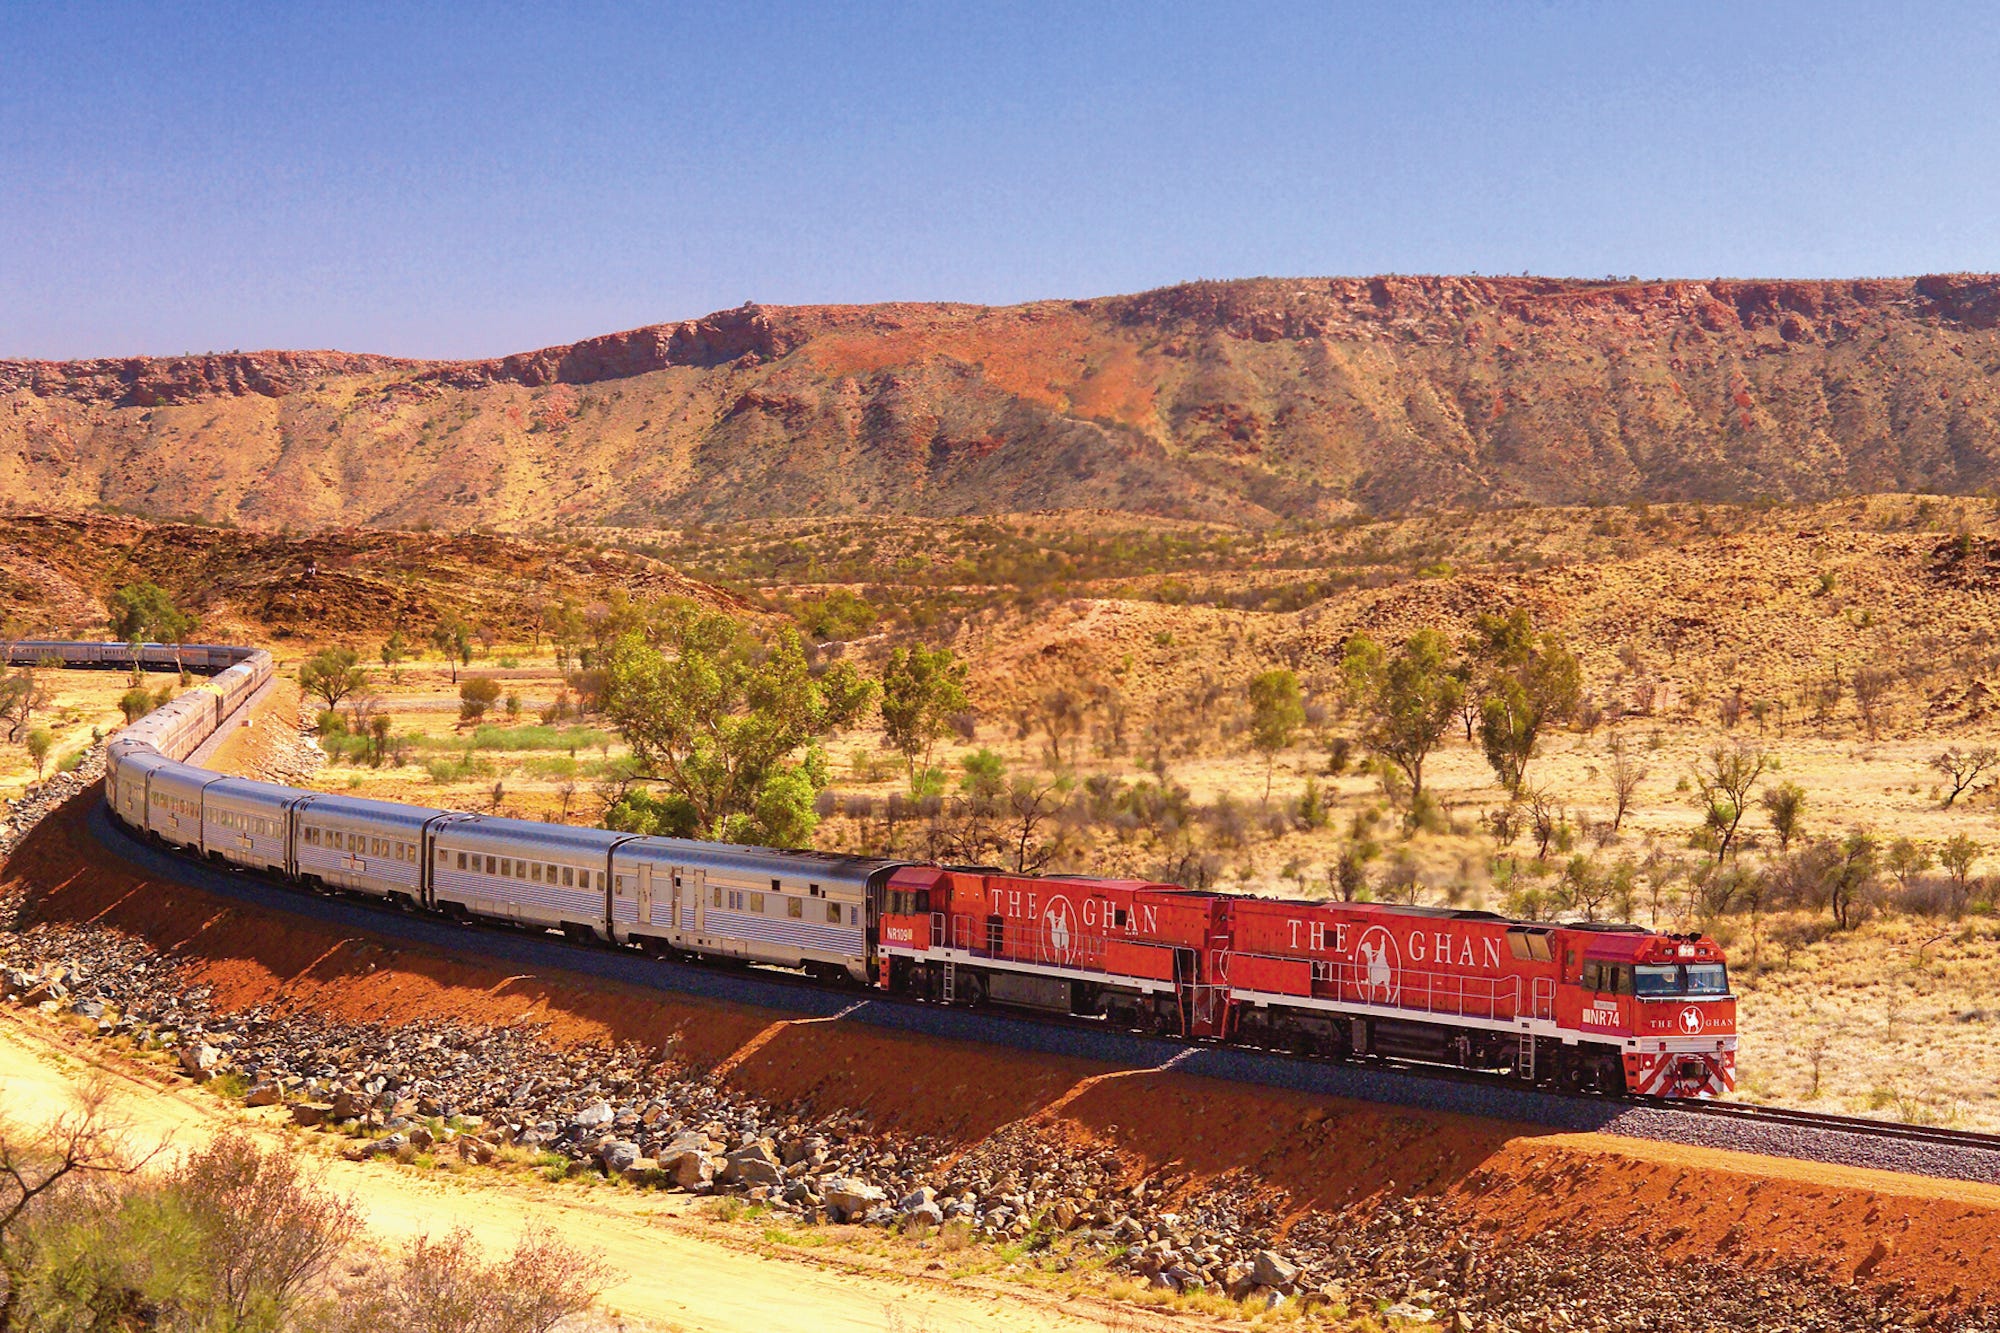 <p><strong>Country</strong>: Australia</p><p><strong>Duration of trip</strong>: 54 hours</p><p><strong>Description: </strong>The Ghan takes riders through the fiery red center of Australia, offering access to the dramatic scenery and indigenous sites that are off-limits by other modes of transit.</p><p><strong>Cost: </strong>Packages start at approximately $2,050</p><p><em>Source: <a href="http://www.greatsouthernrail.com.au/trains/the-ghan" rel="nofollow noopener">Great Southern Rail</a></em></p>